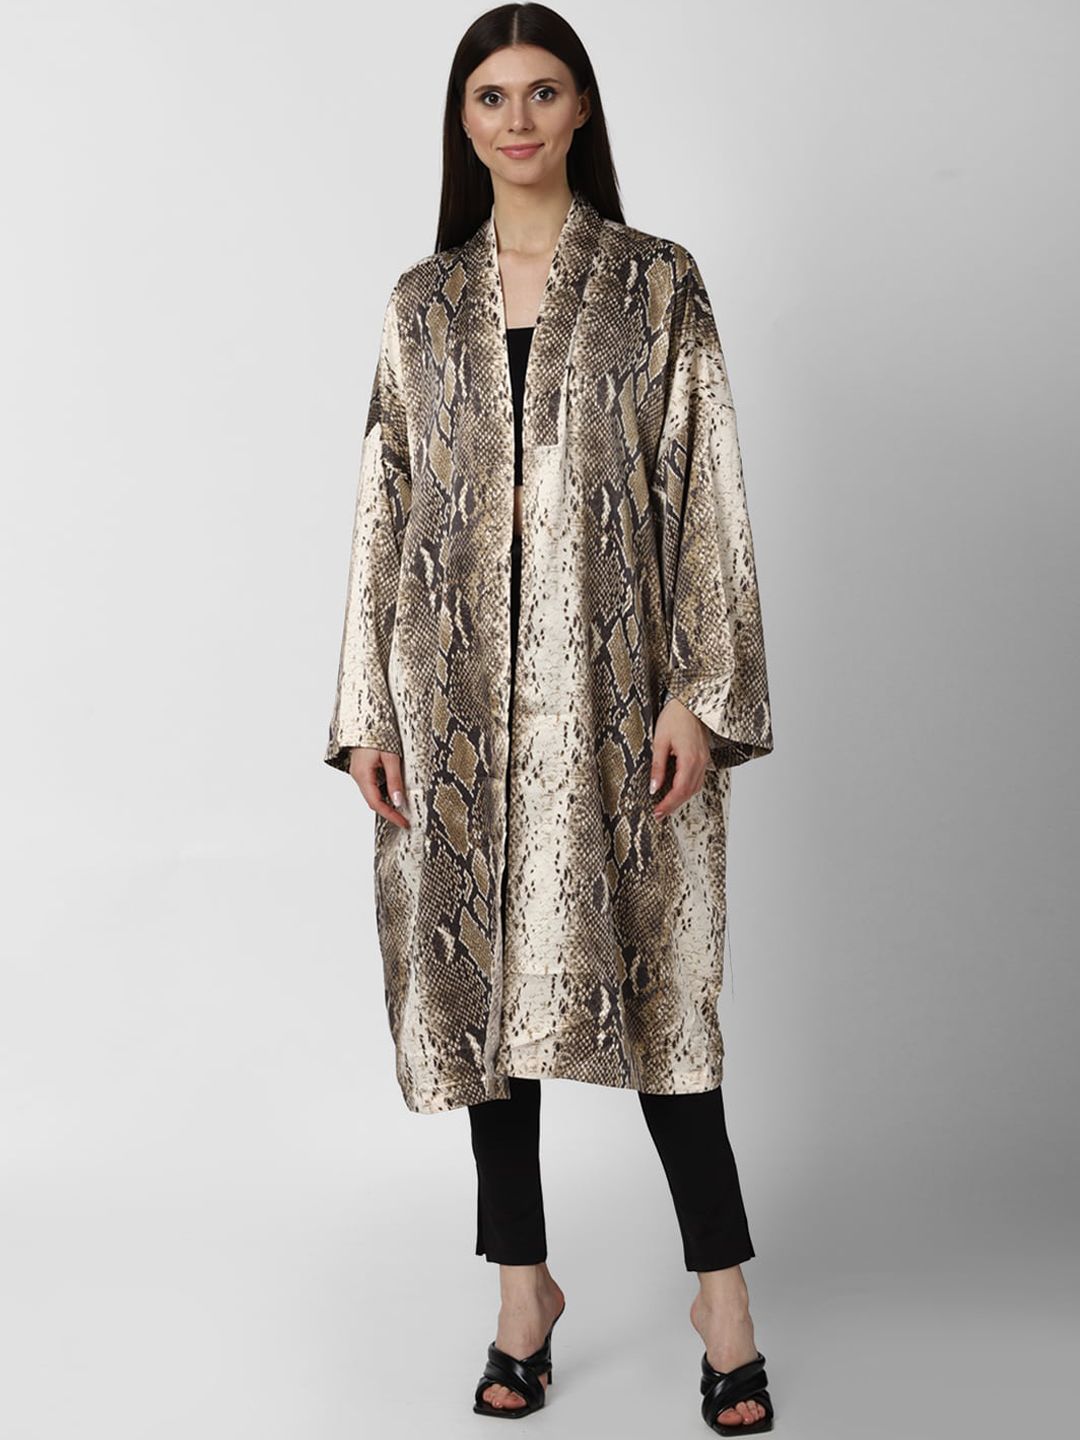 FOREVER 21 Women Brown & Beige Animal Printed Satin Longline Open Front Jacket Price in India